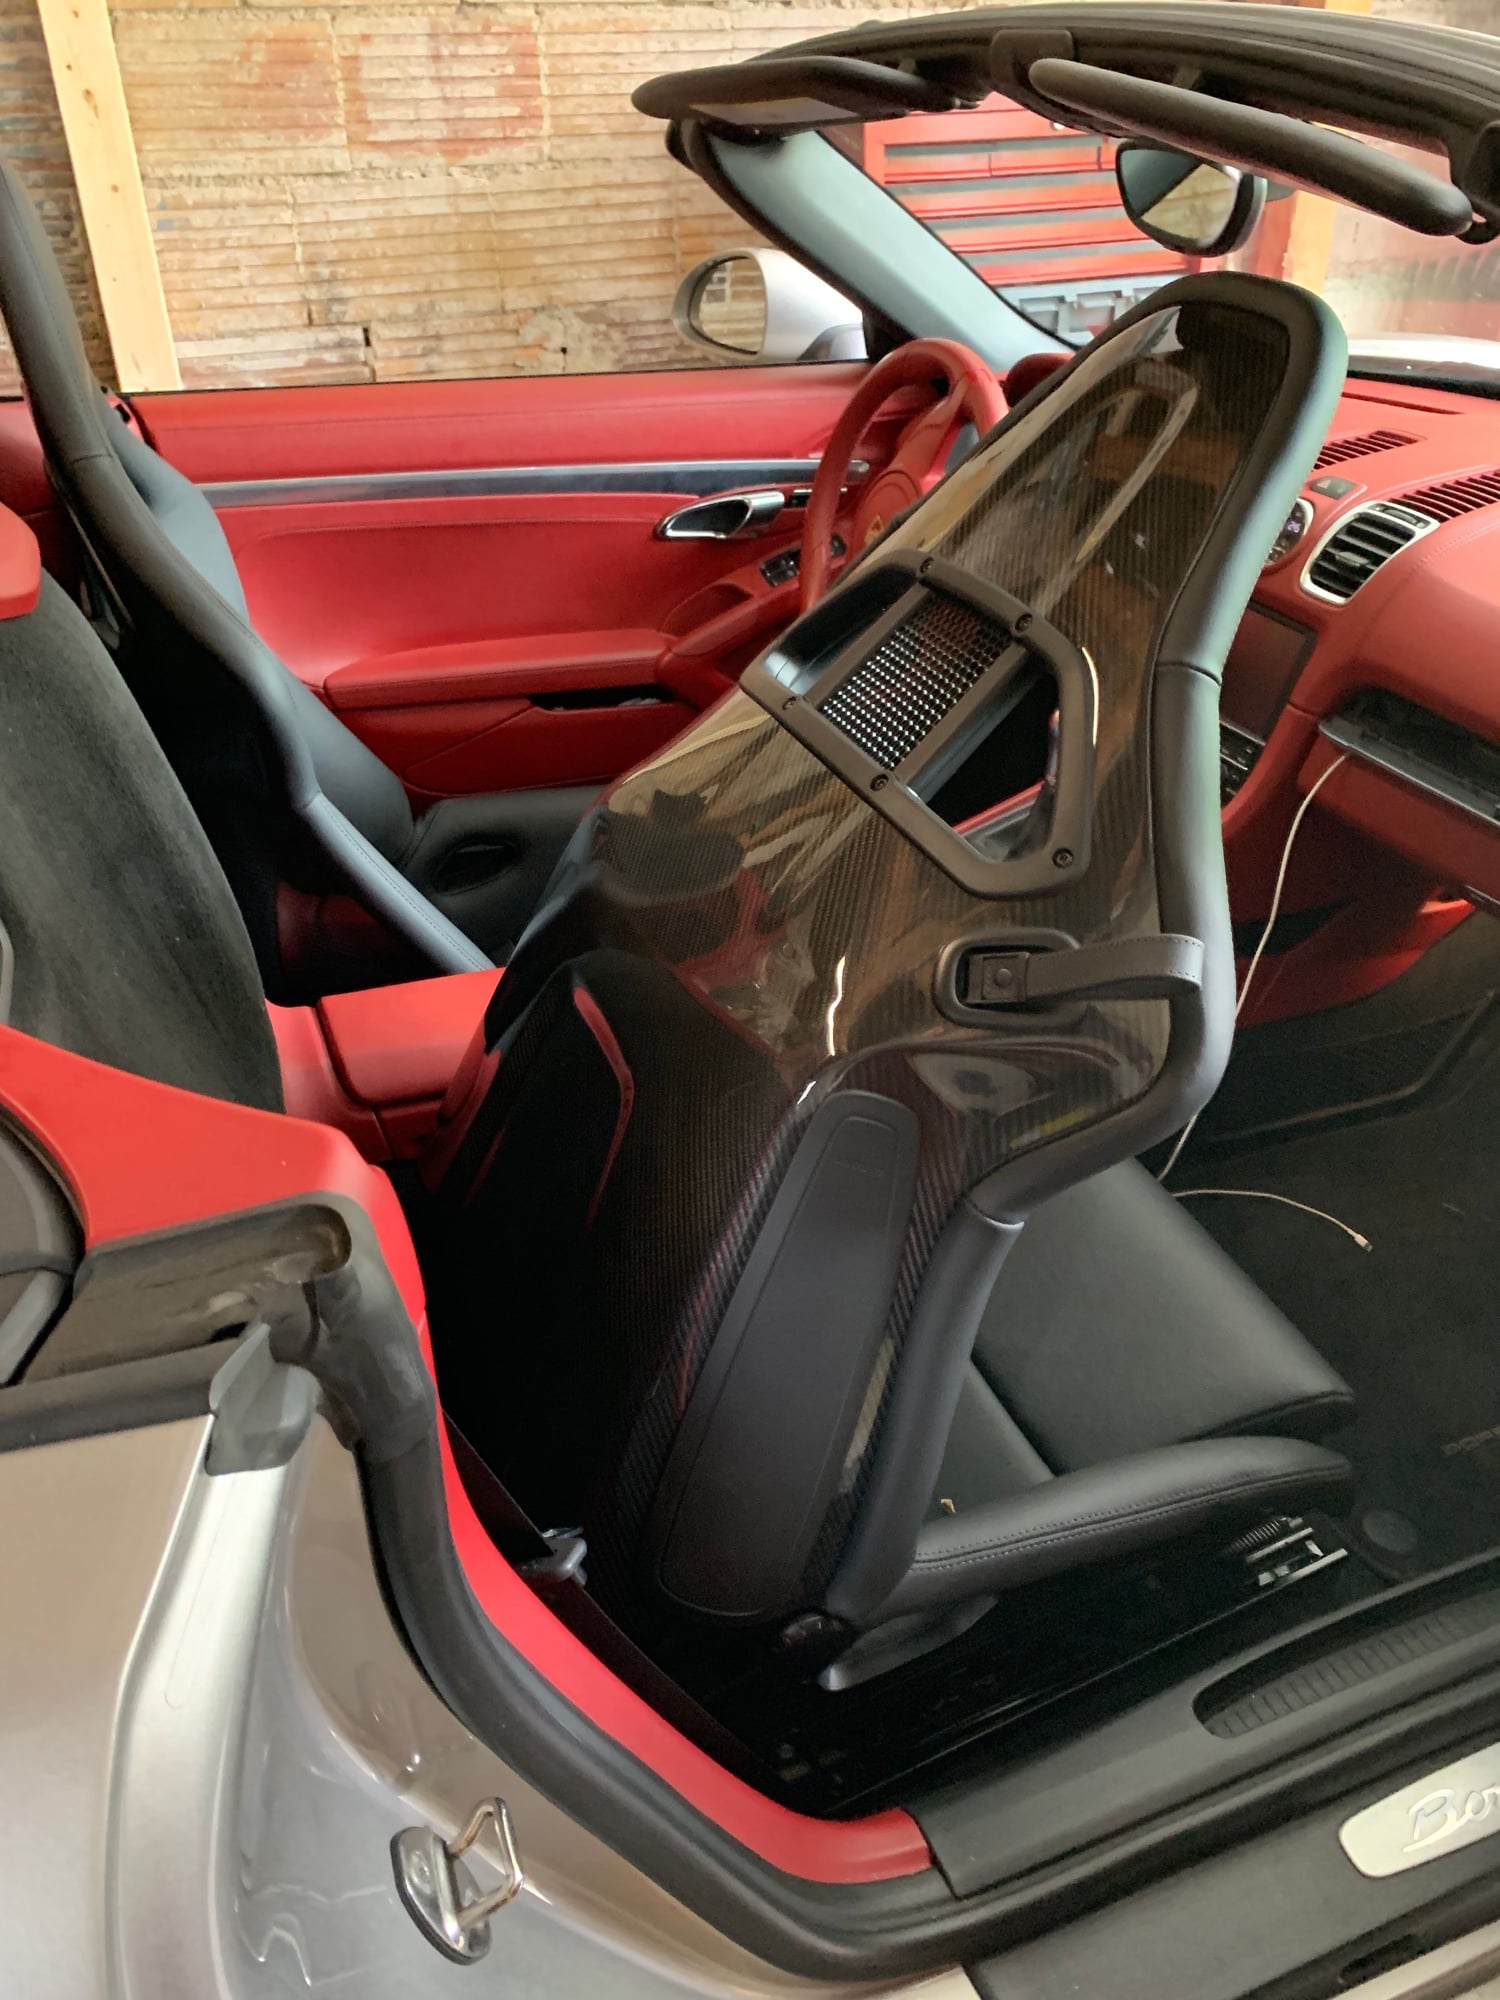 Interior/Upholstery - 981/991 GT2 Heated Foldable Buckets Rest of World, Like New (SET) $8800 OBO, Pgh PA - Used - 2012 to 2016 Porsche 911 - 2012 to 2016 Porsche Boxster - 2012 to 2016 Porsche Cayman - Bridgeville, PA 15017, United States